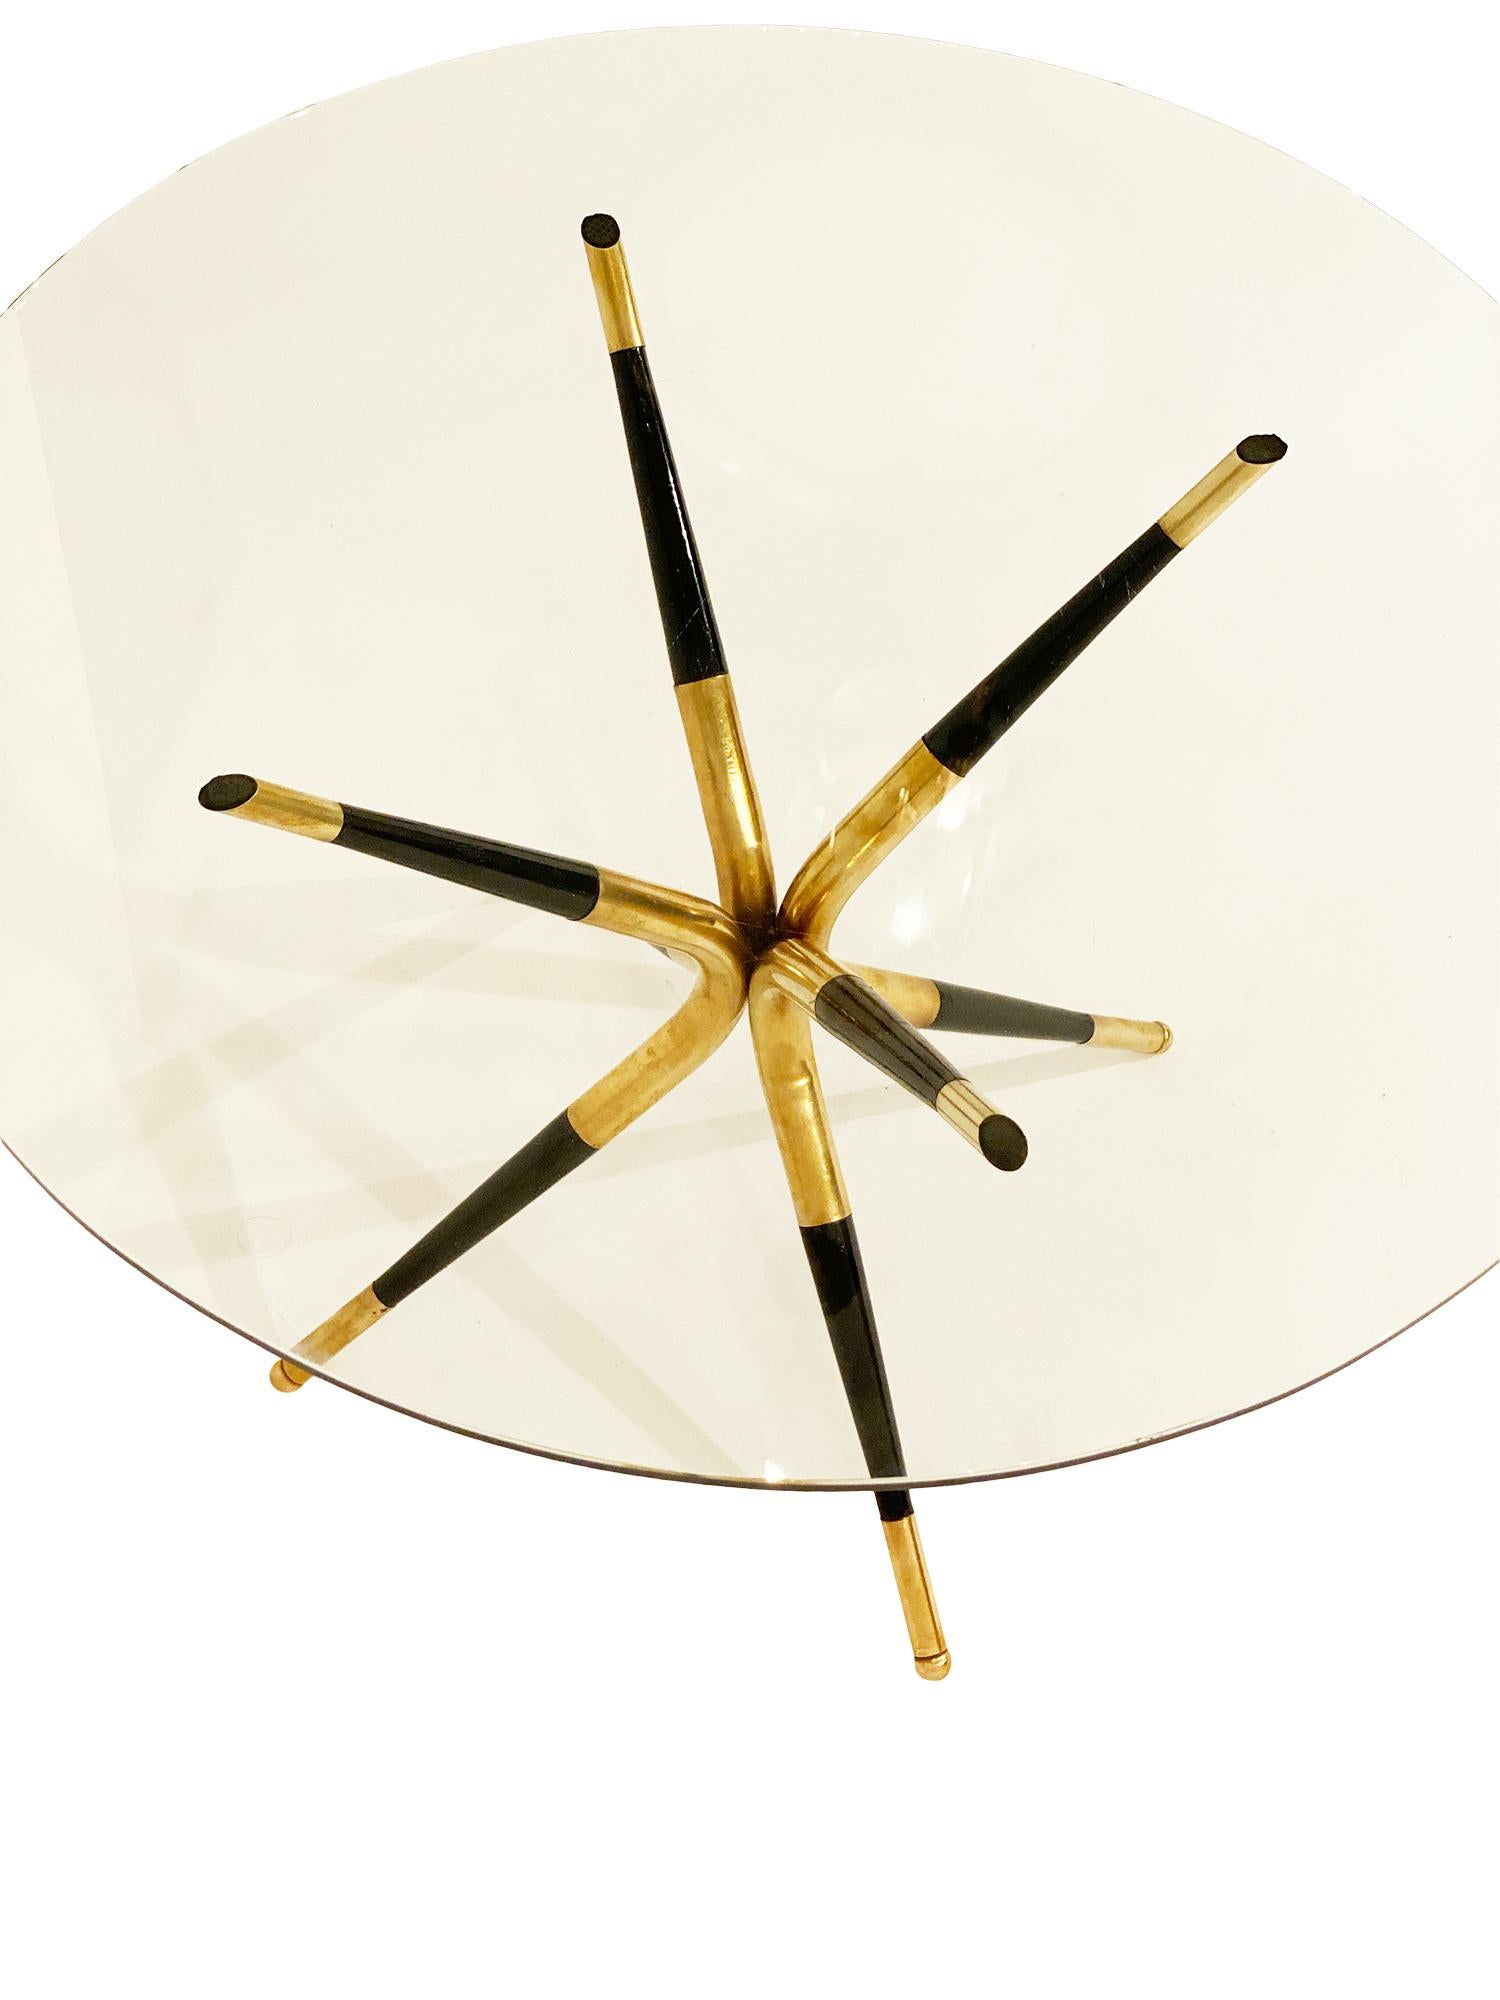 Paolo Buffa style side table featuring four legs combining brass and ebonized wood. By iconic Italian designer Paolo Buffa, this piece has a clear glass top and superb style!